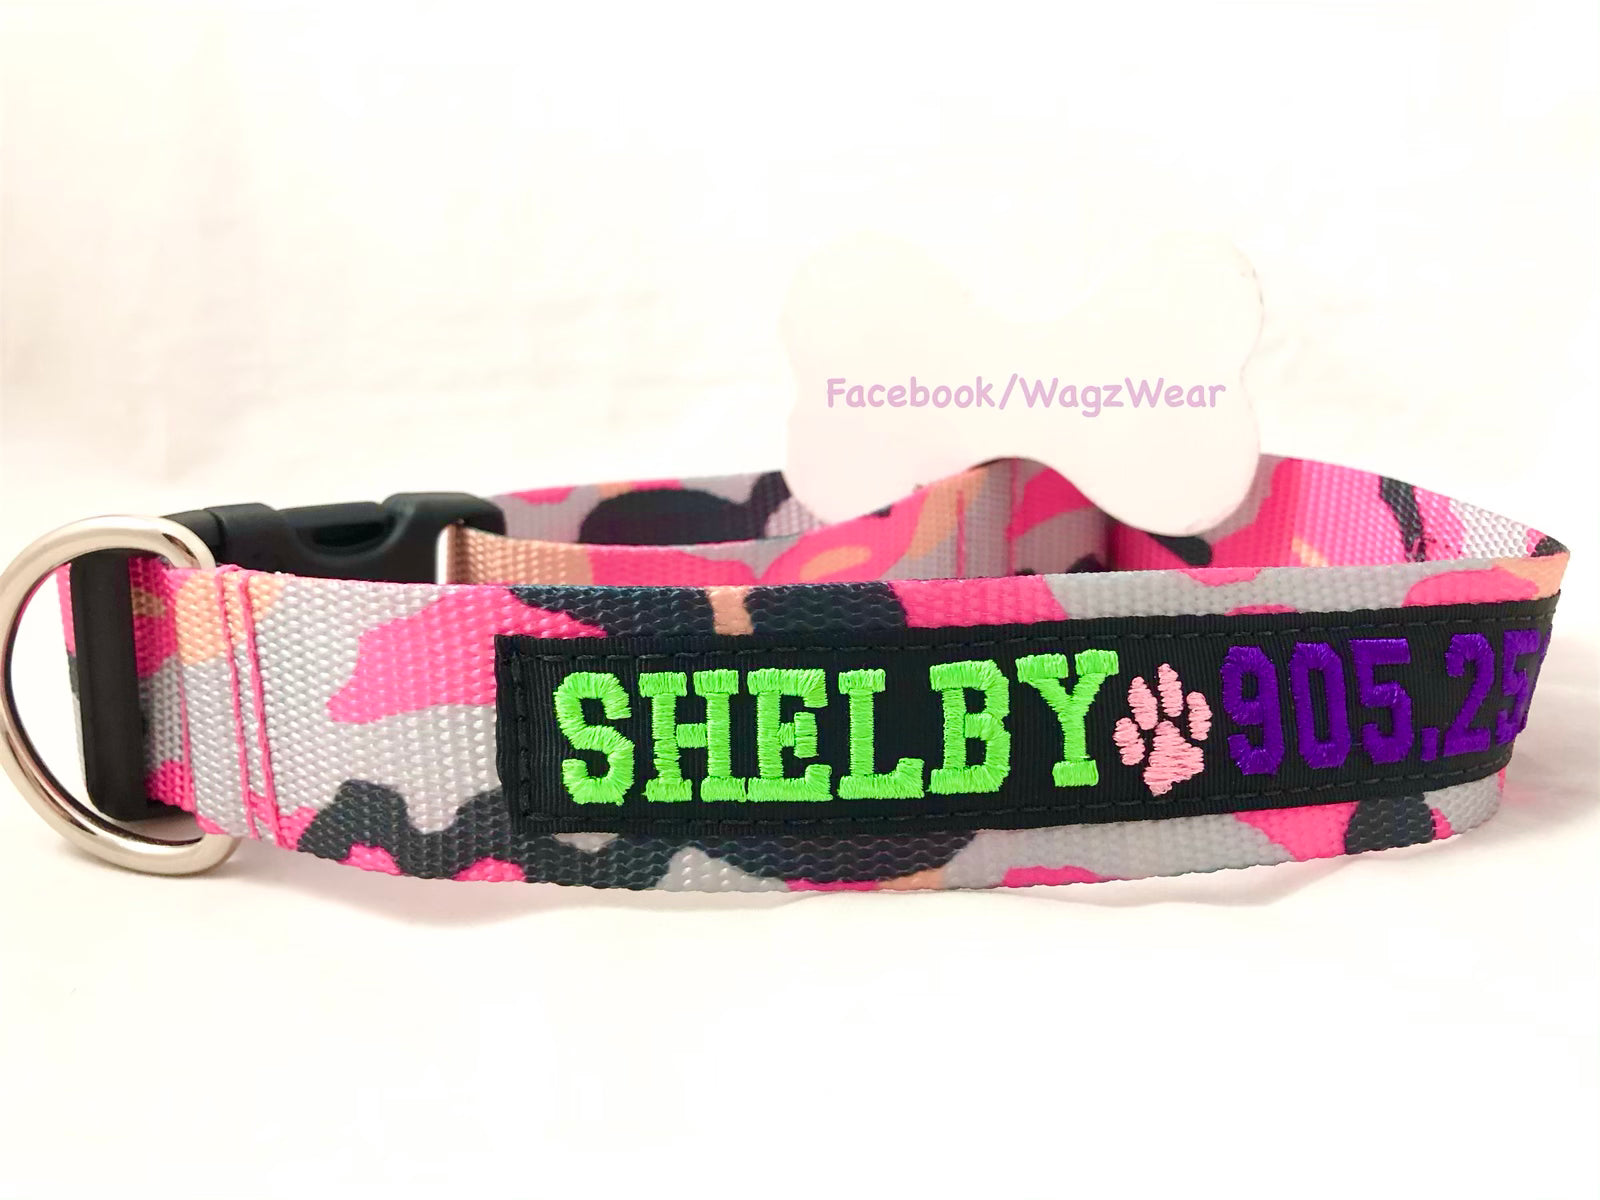 Dog Collar with Custom Embroidered ID - 1.5" Width